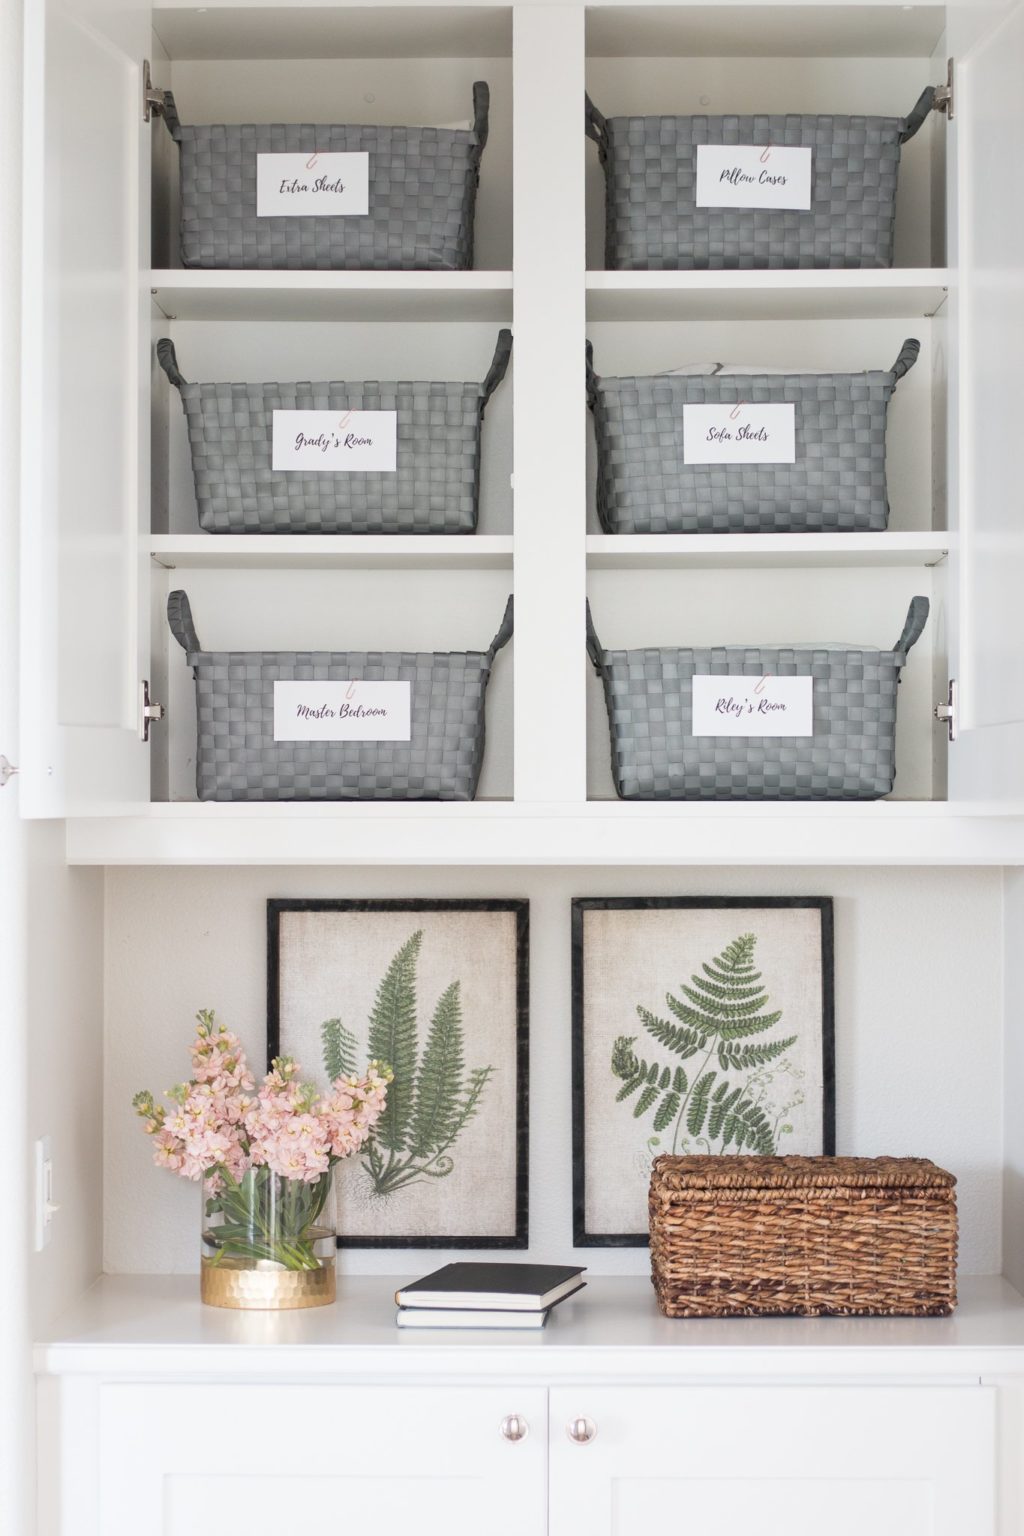 Linen Closet in a cabinet from A Thoughtful Place